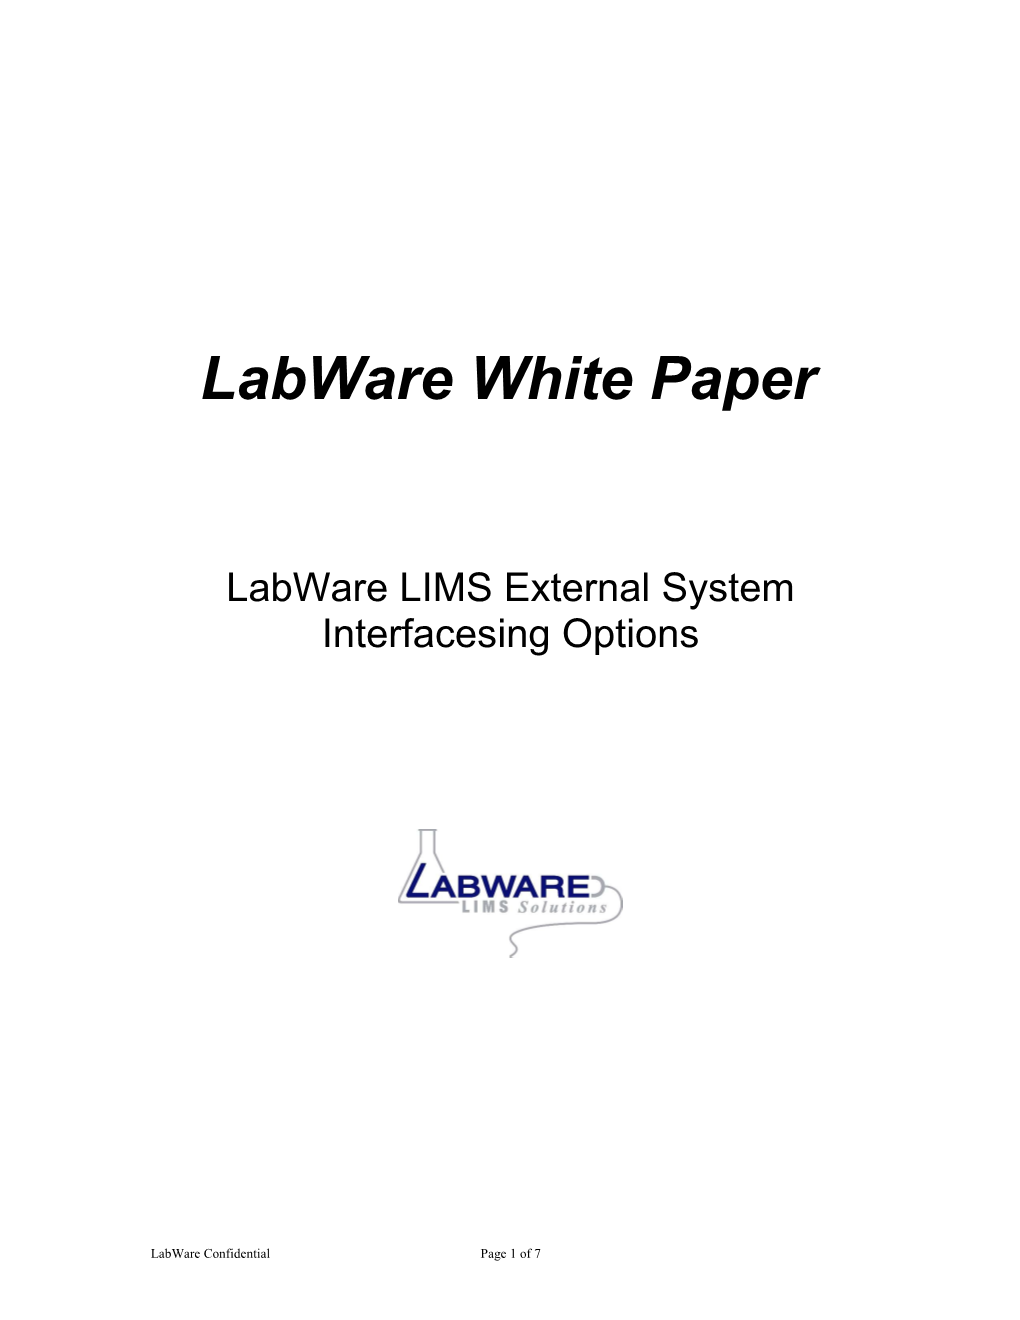 Labware LIMS External System Interfaces